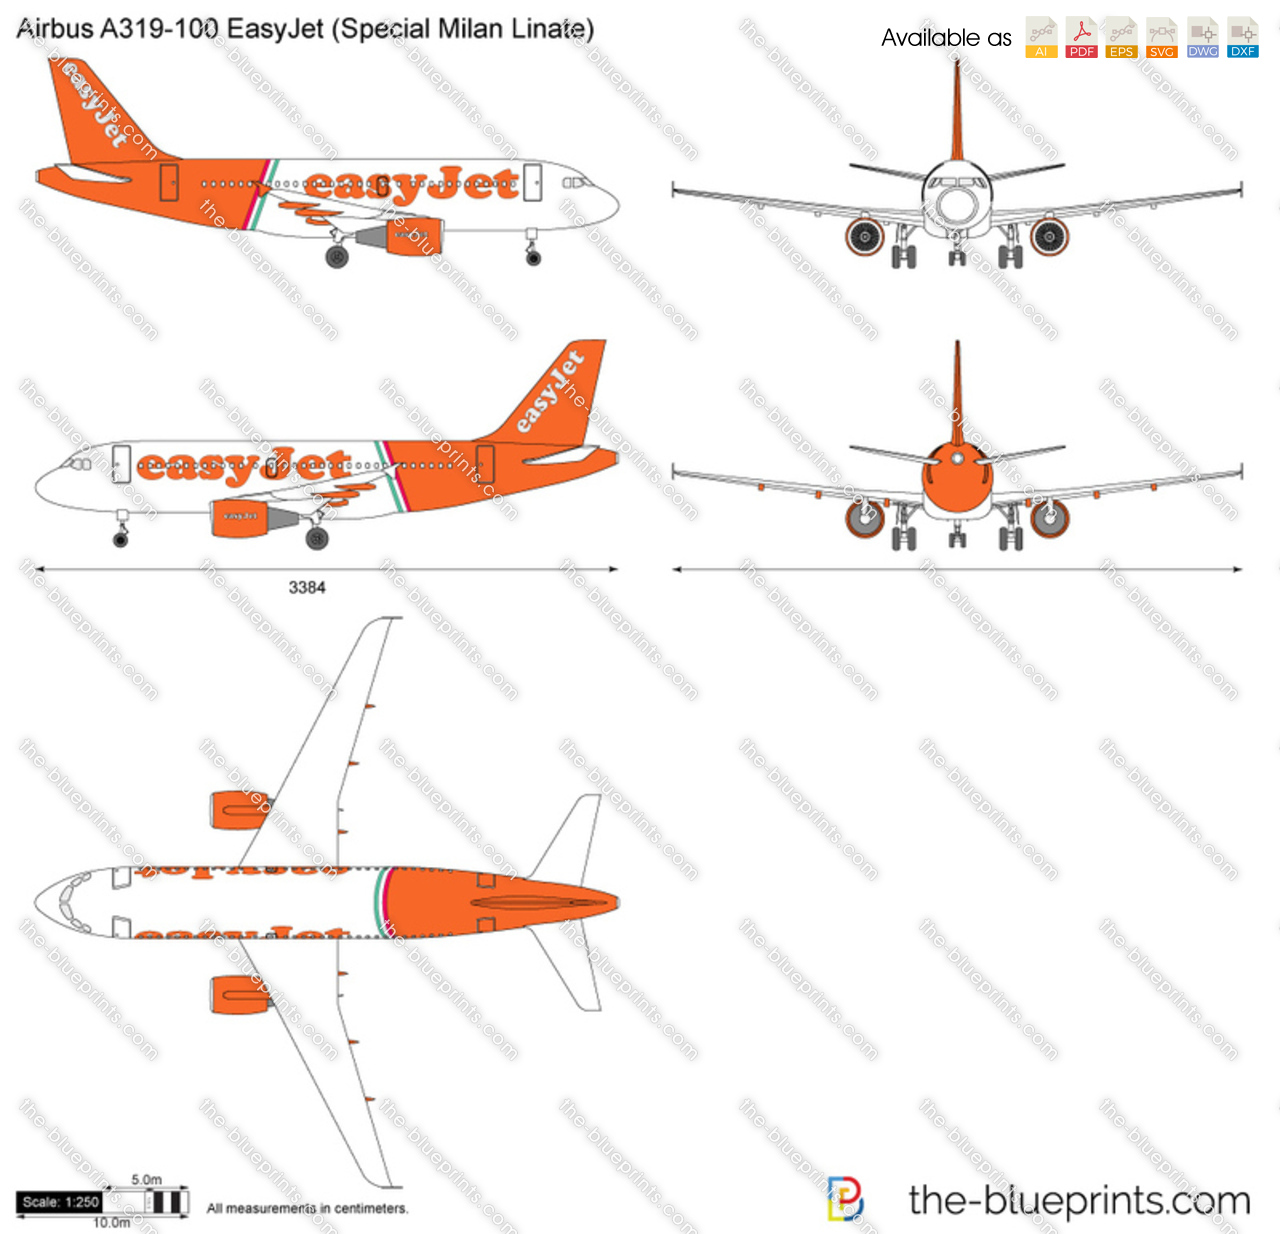 Airbus A319-100 EasyJet (Special Milan Linate)